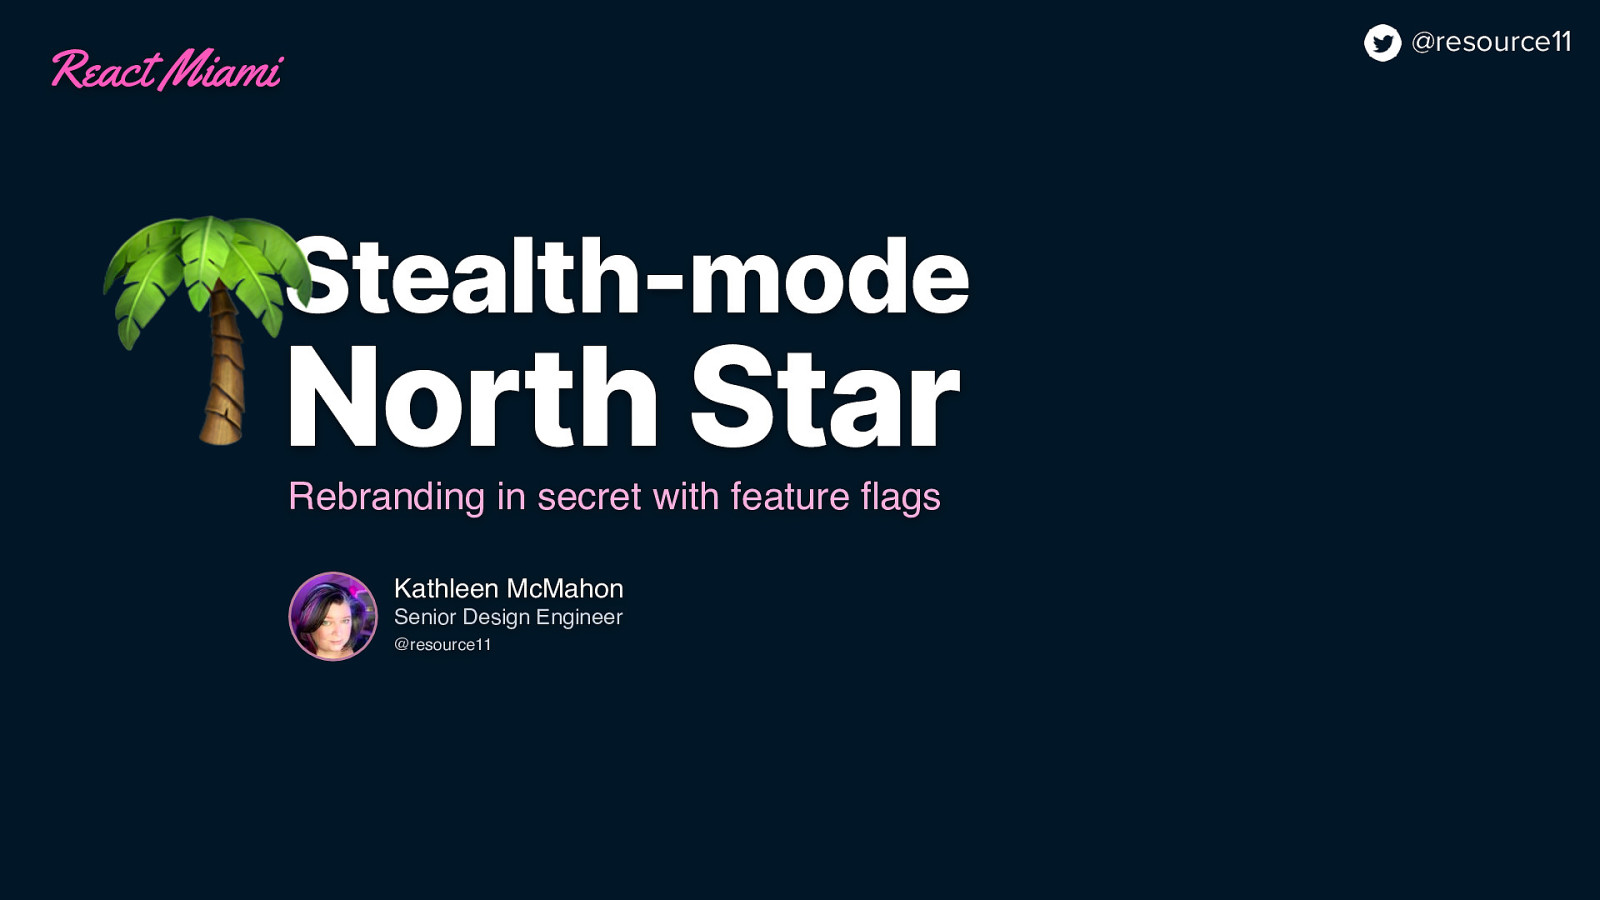  Stealth-mode North Star — Rebranding in secret with feature flags